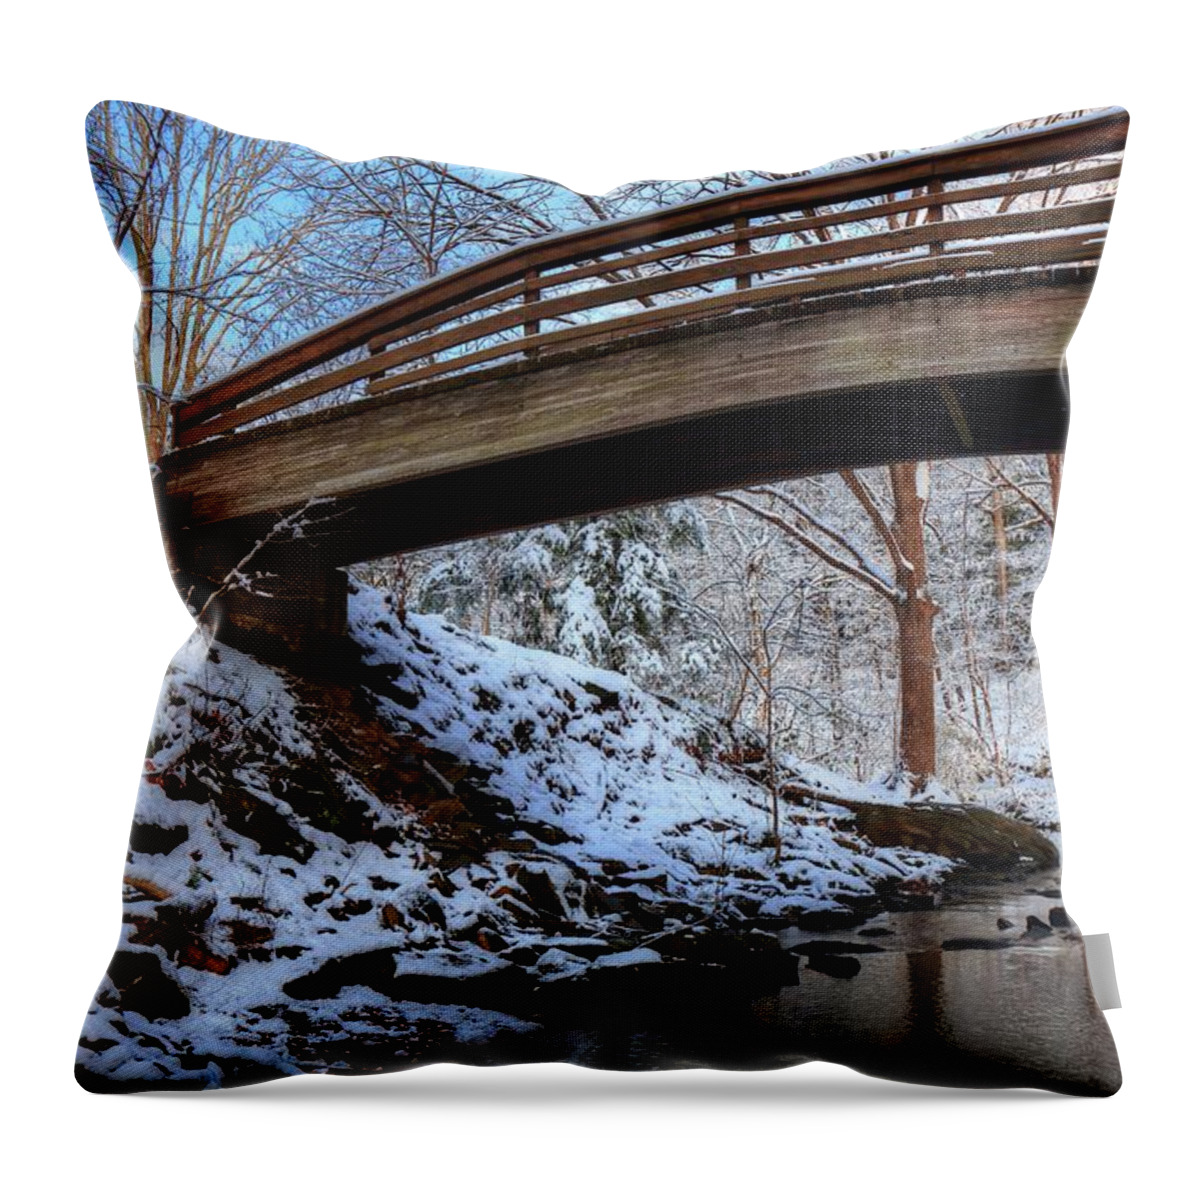 Botanical Gardens Asheville North Carolina Throw Pillow featuring the photograph Winter At The Botanical Garden Bridge Asheville North Carolina by Carol Montoya